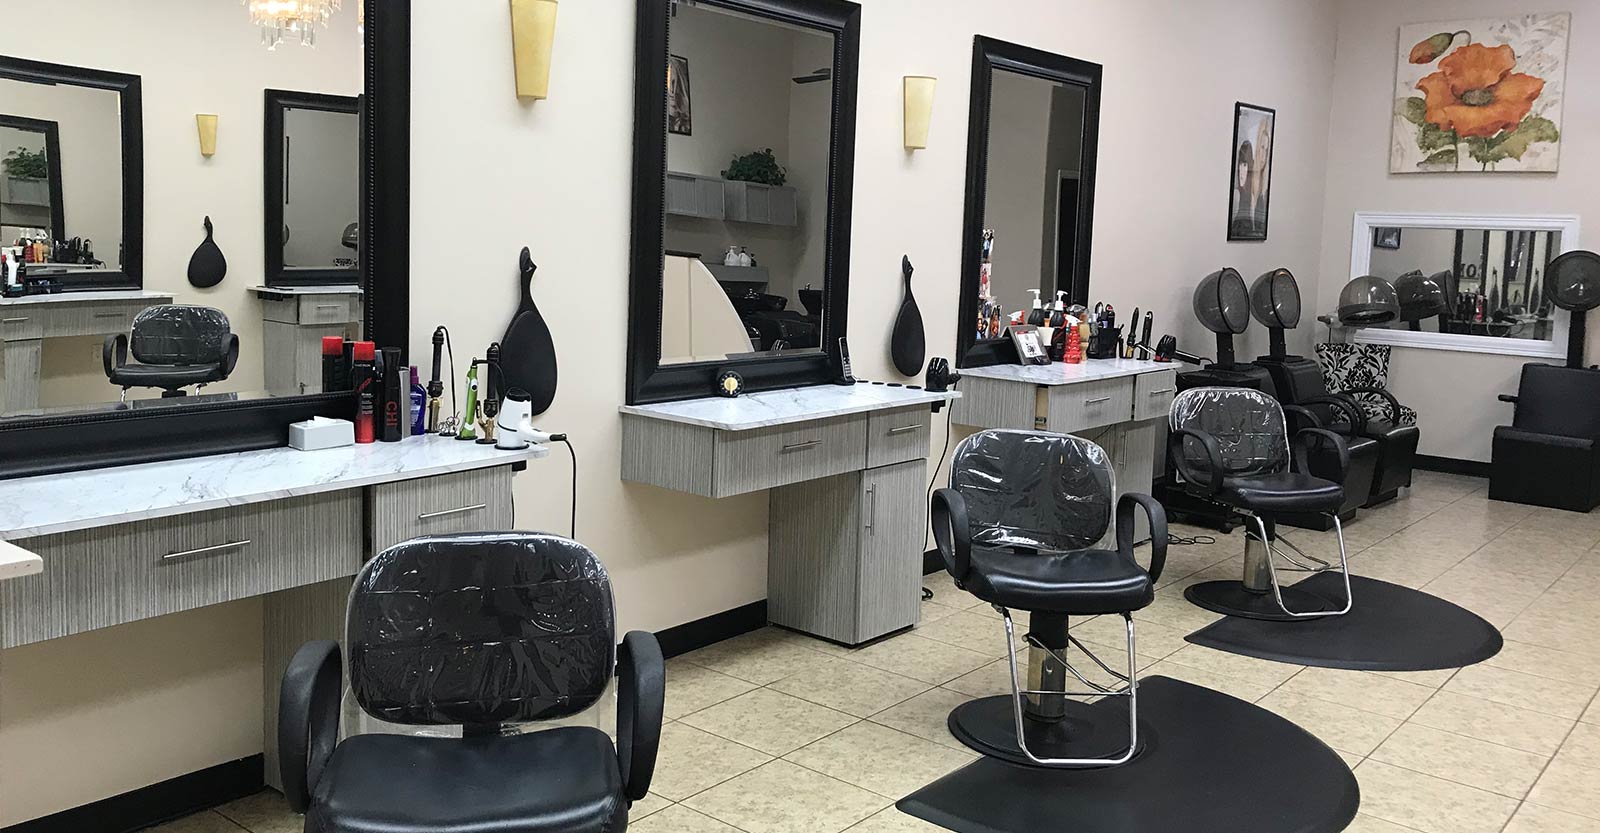 6. Affordable Hair Salons Near Me - wide 9